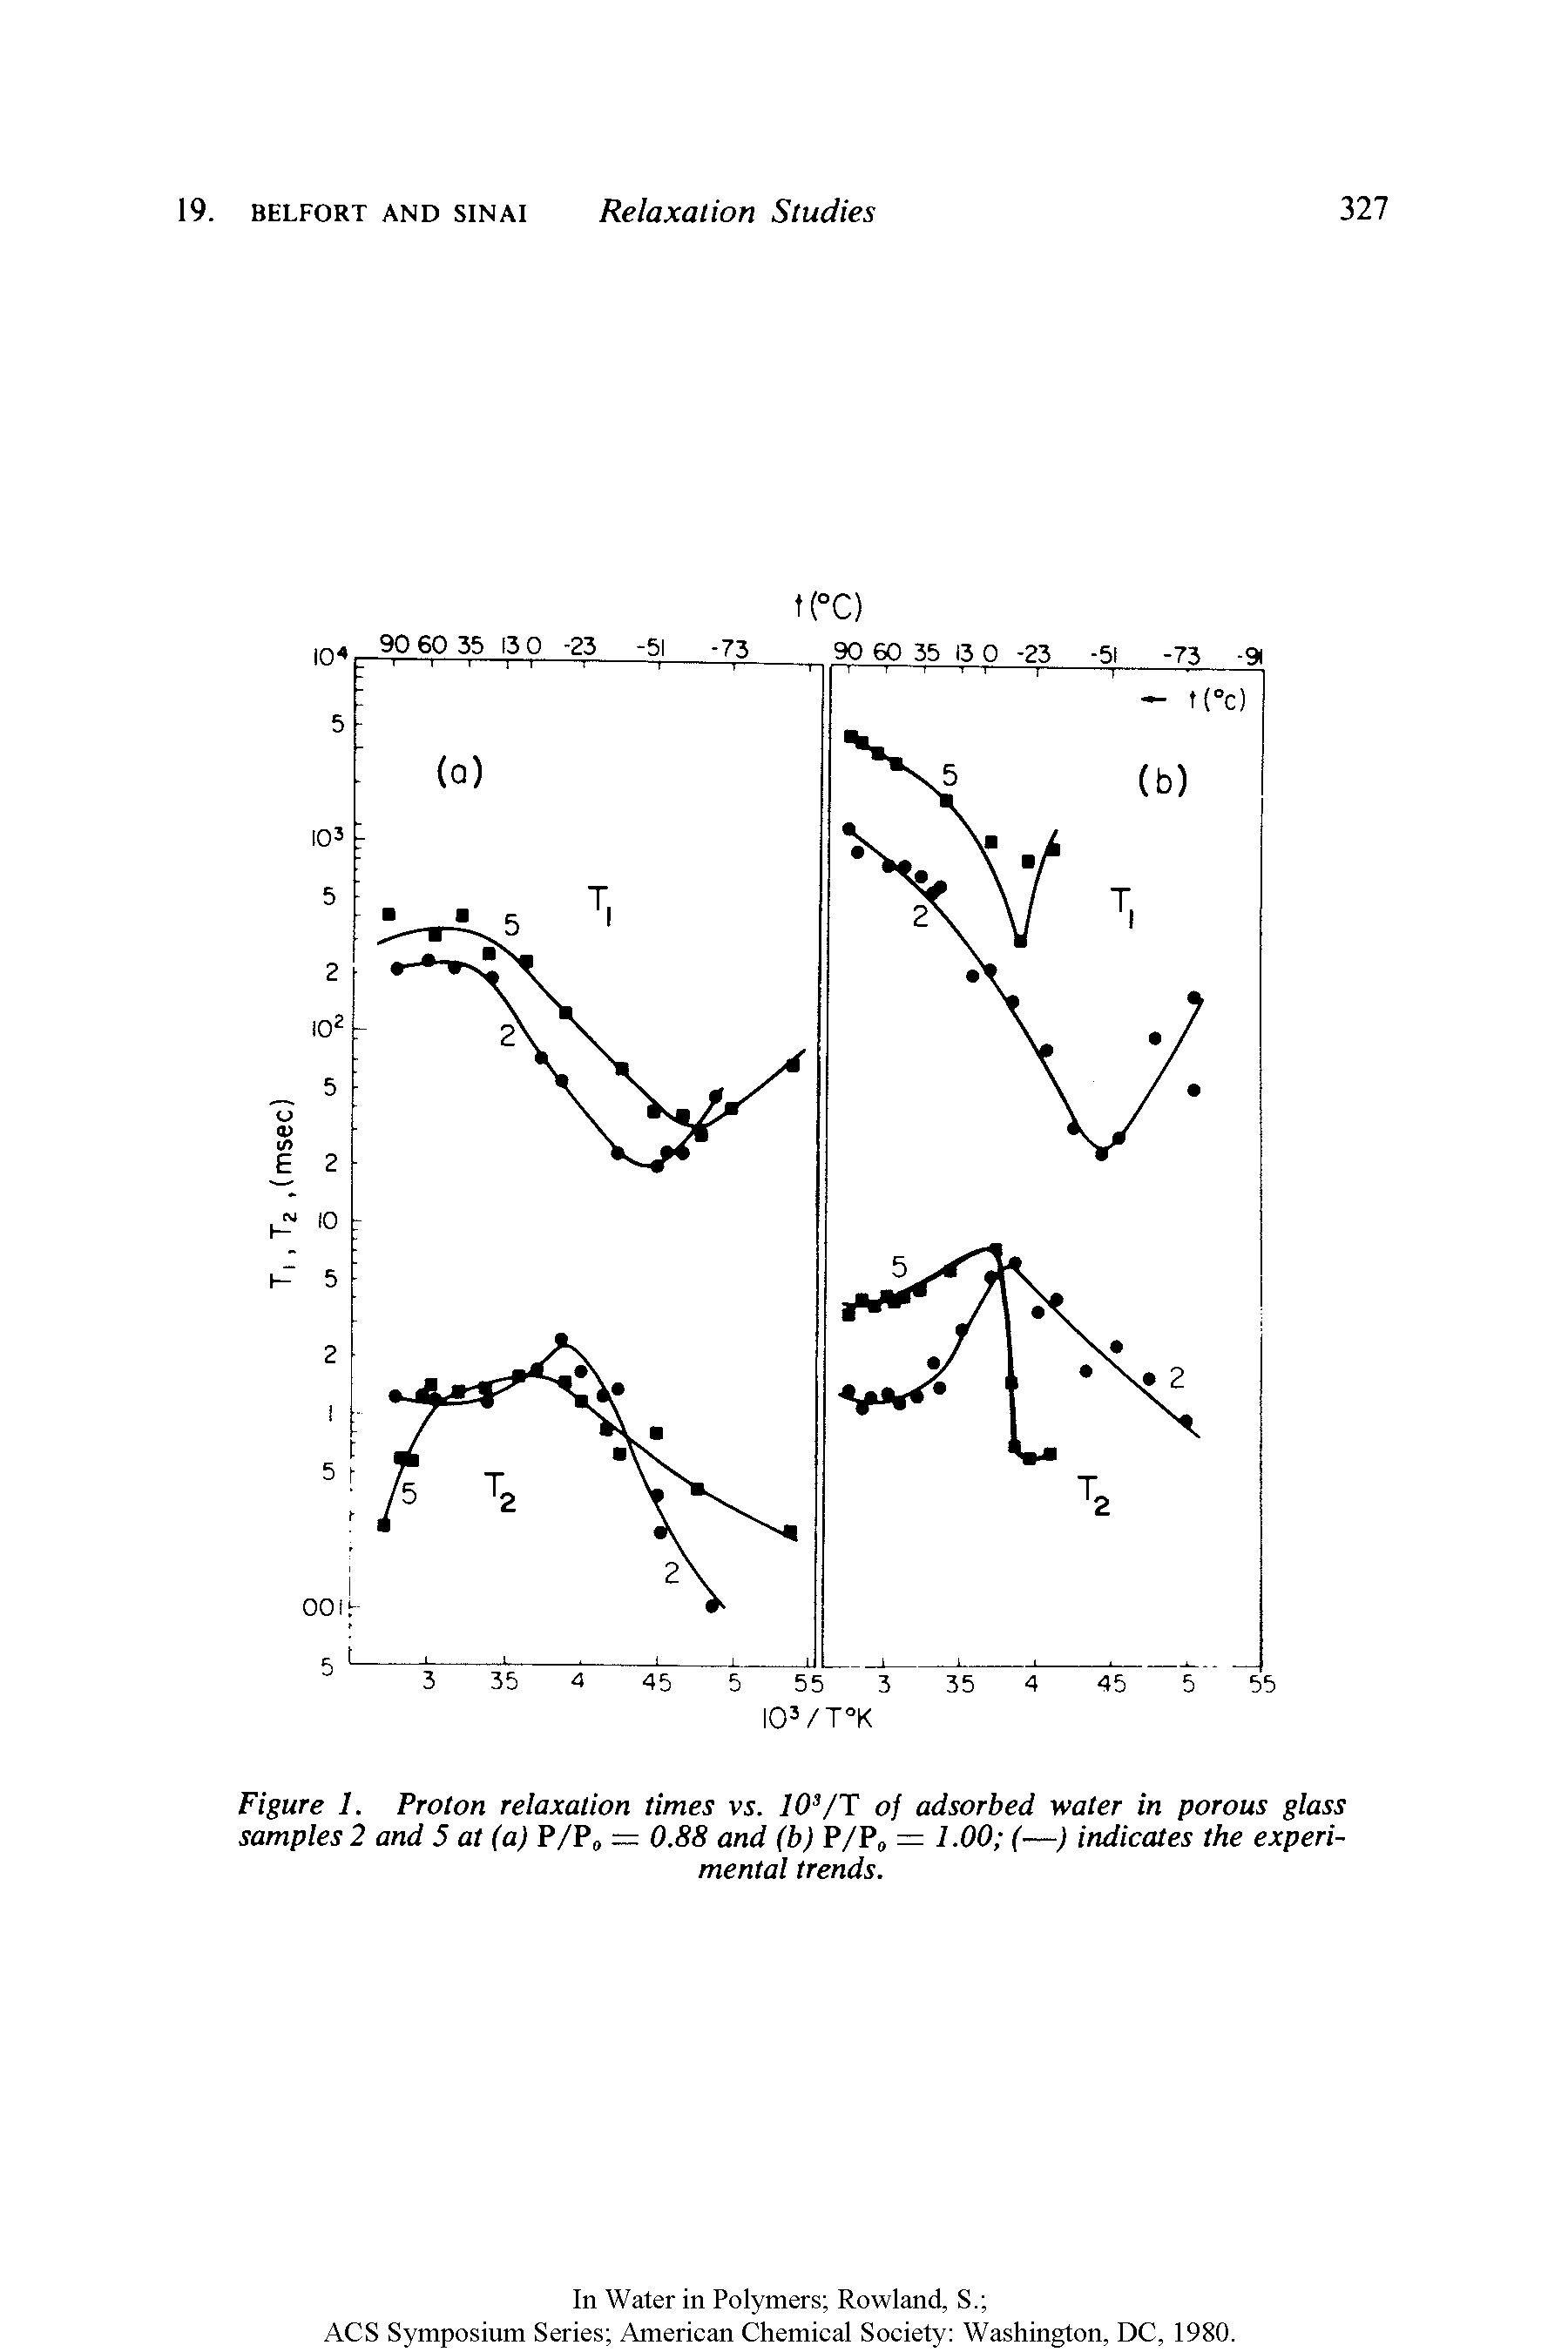 Figure 1. Proton relaxation times vs. 10 /T of adsorbed water in porous glass samples 2 and 5 at (a) P/Po = 0.88 and (b) P/Po = 1.00 (—) indicates the experimental trends.